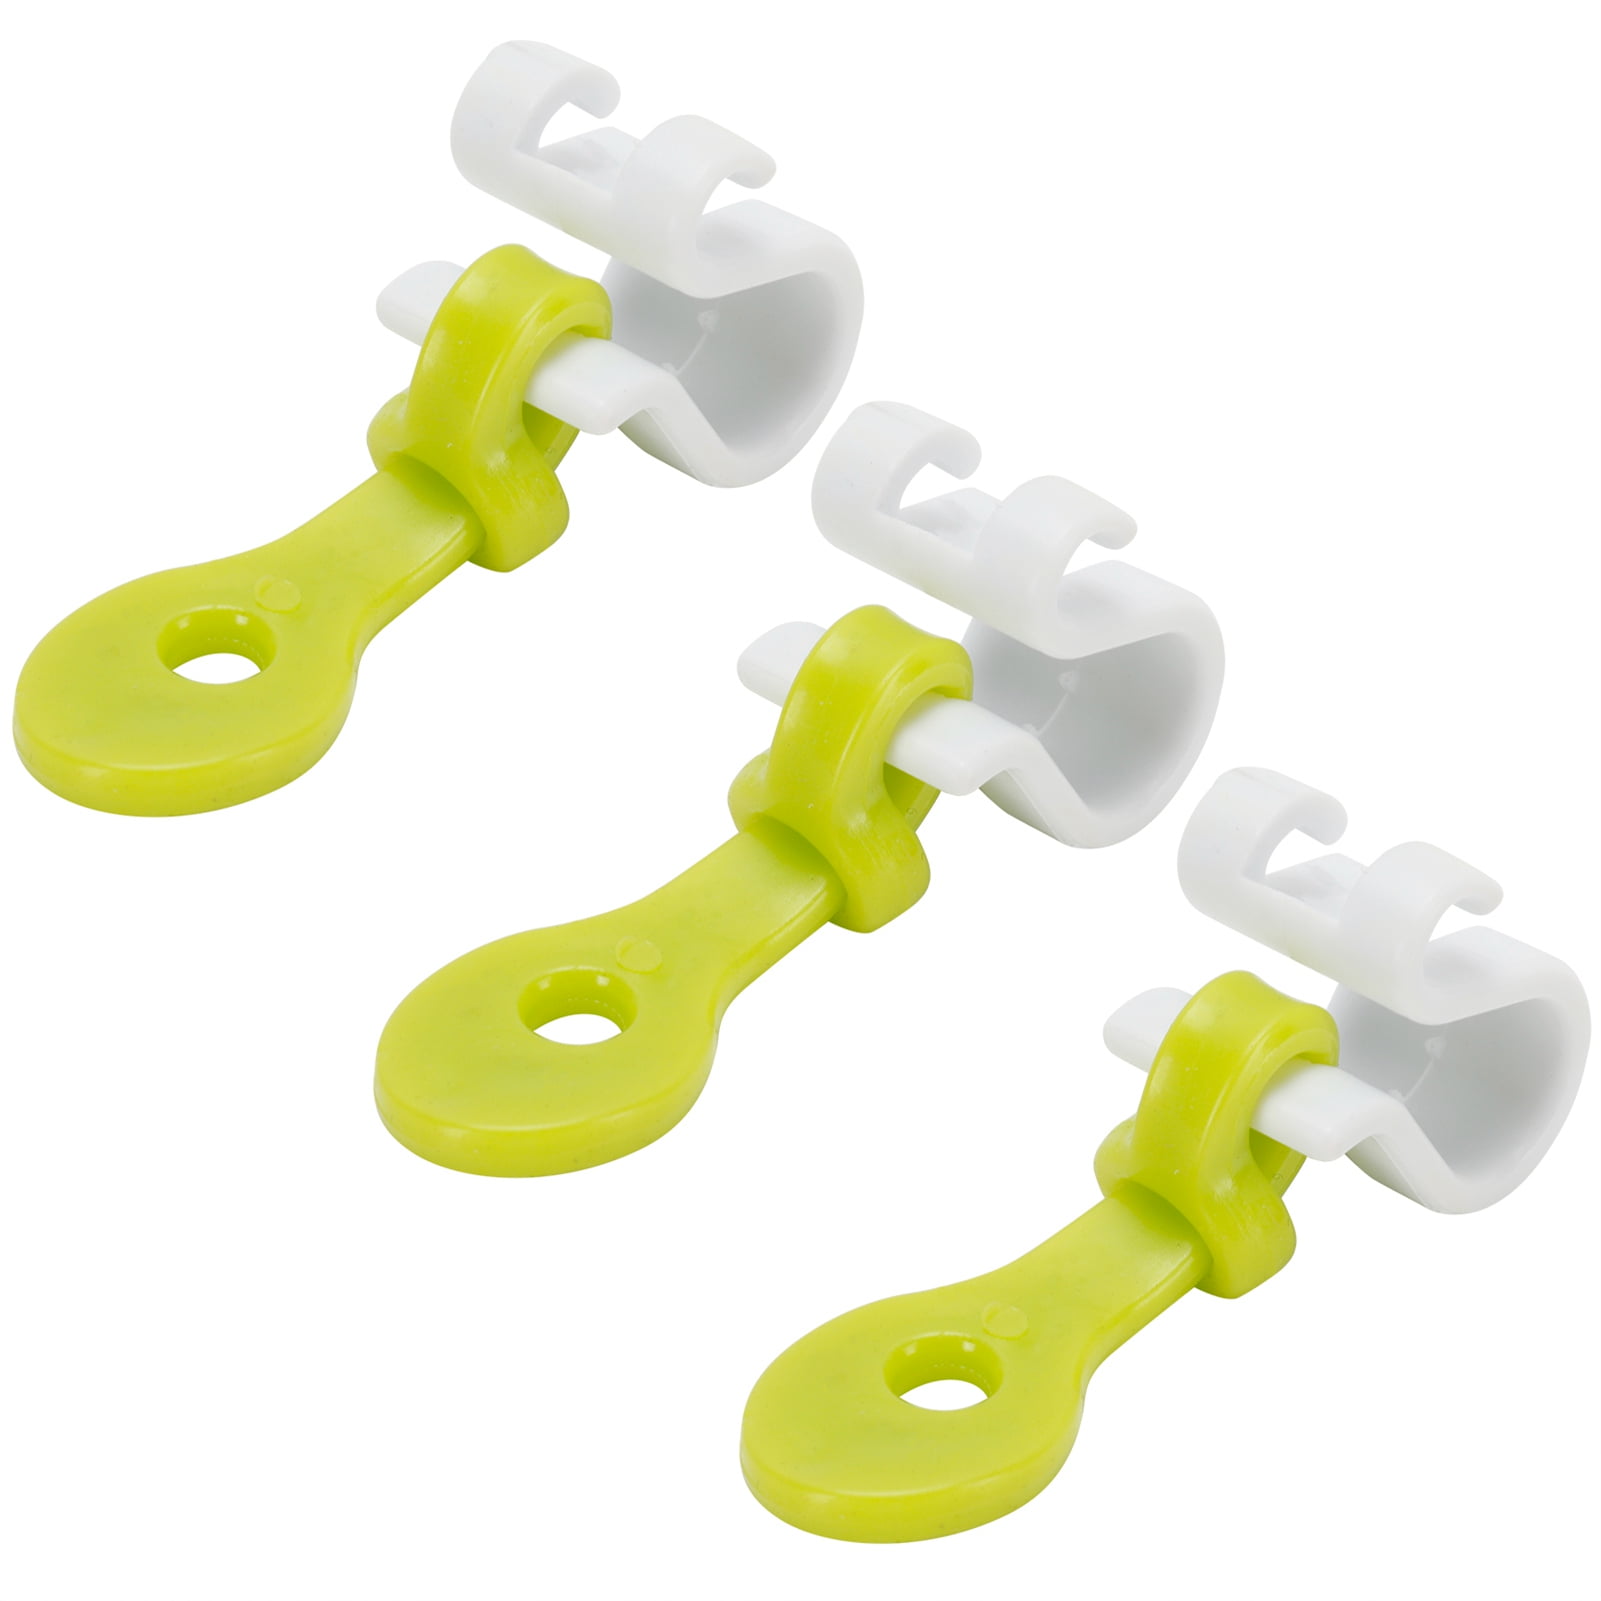 3pcs/pack Green Icing Bag Clips Piping Decorating Tie Strap Cake Pastry Tools KI